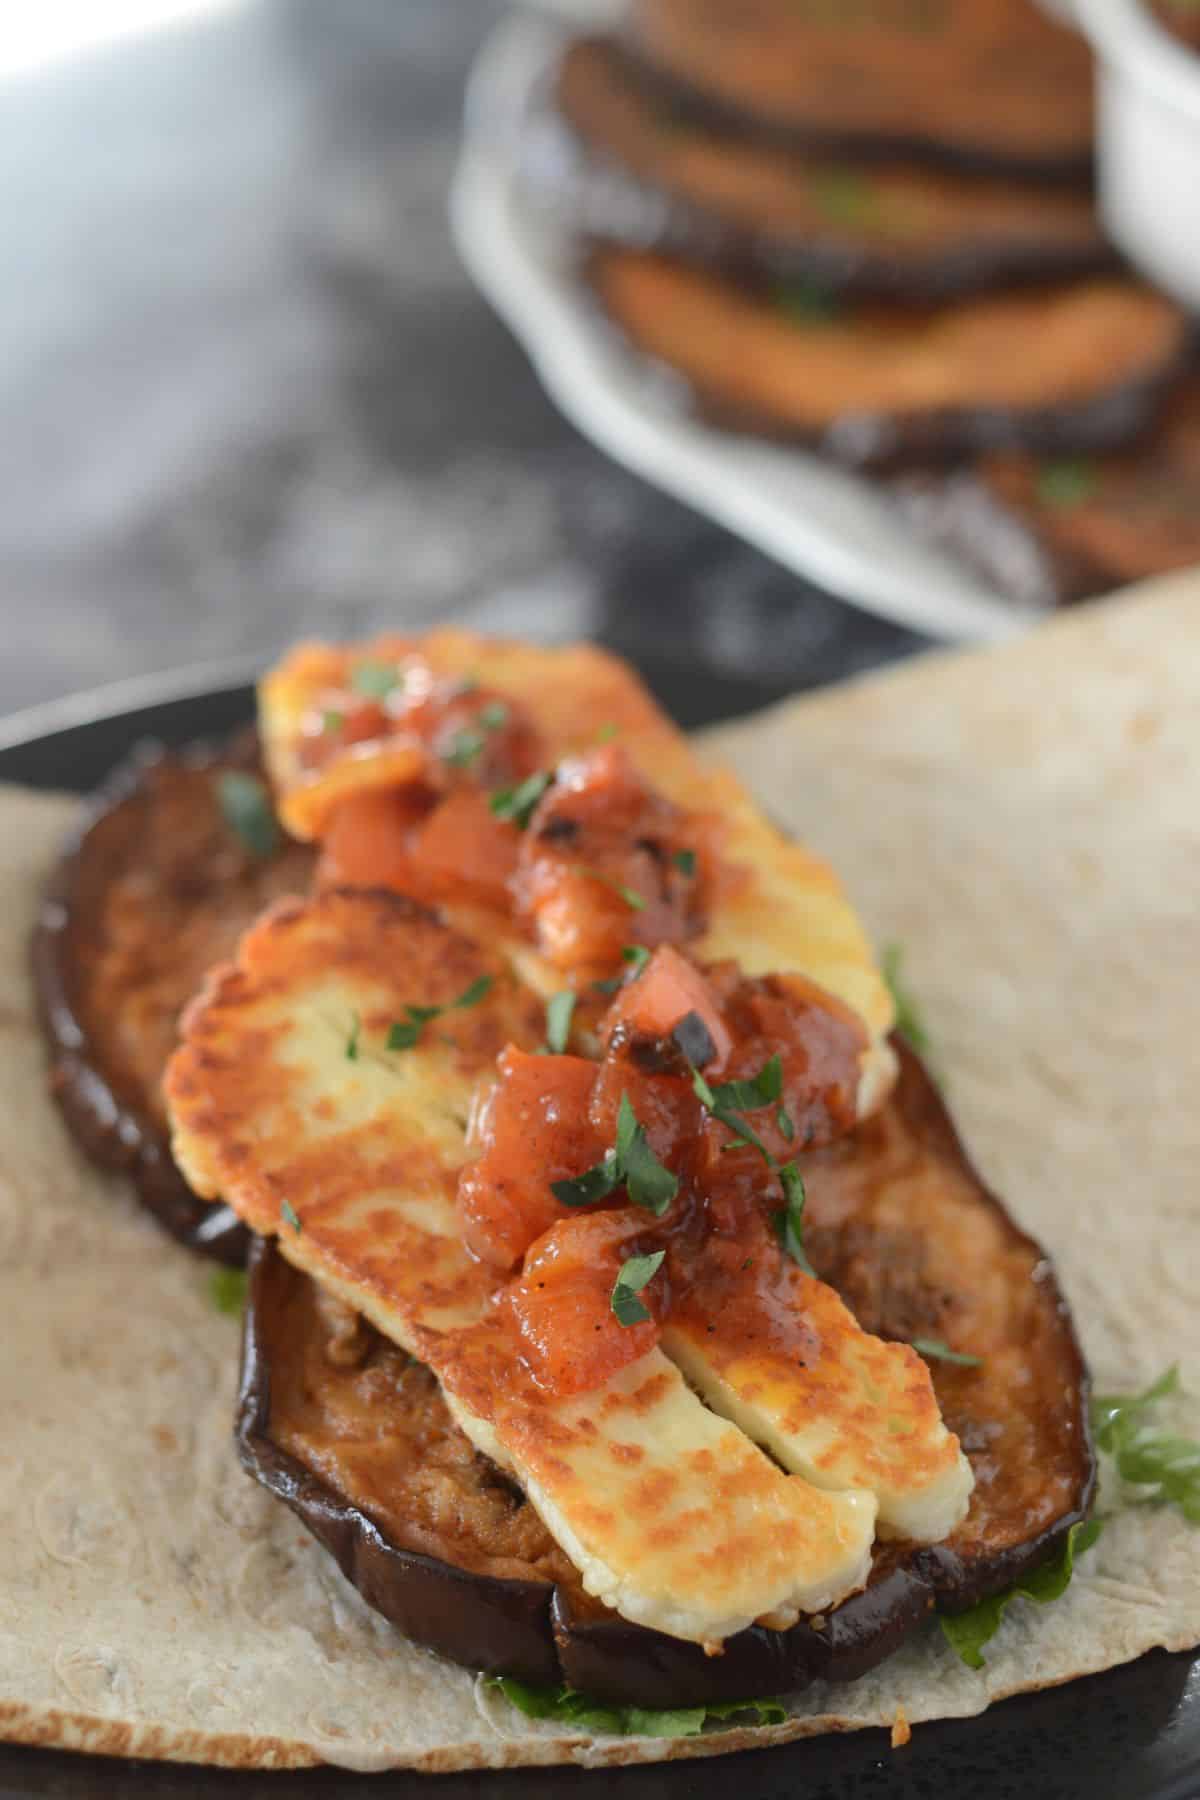 Roasted eggplant sliced topped with Haloumi cheese.